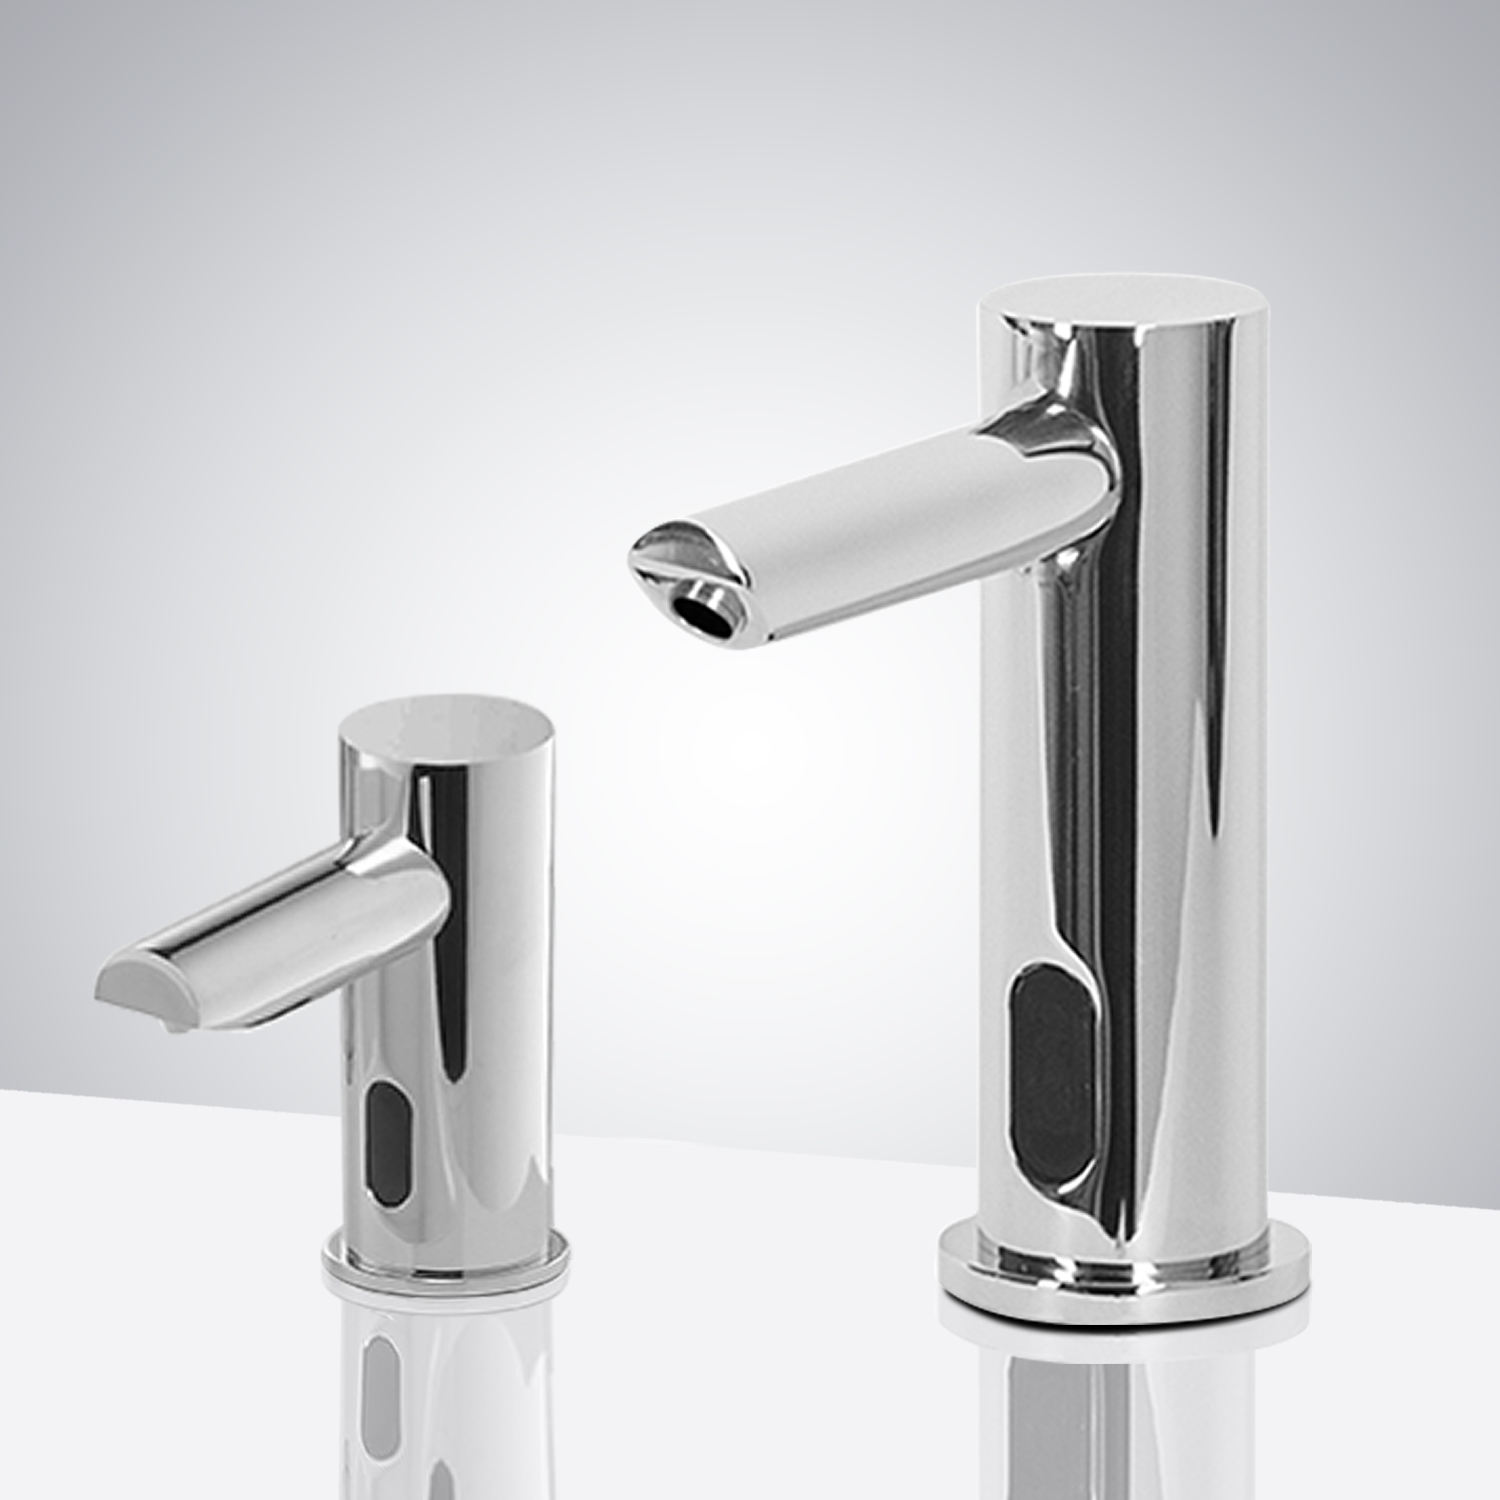 Solo Commercial Automatic Touchless Sensor Faucet With Soap Dispenser